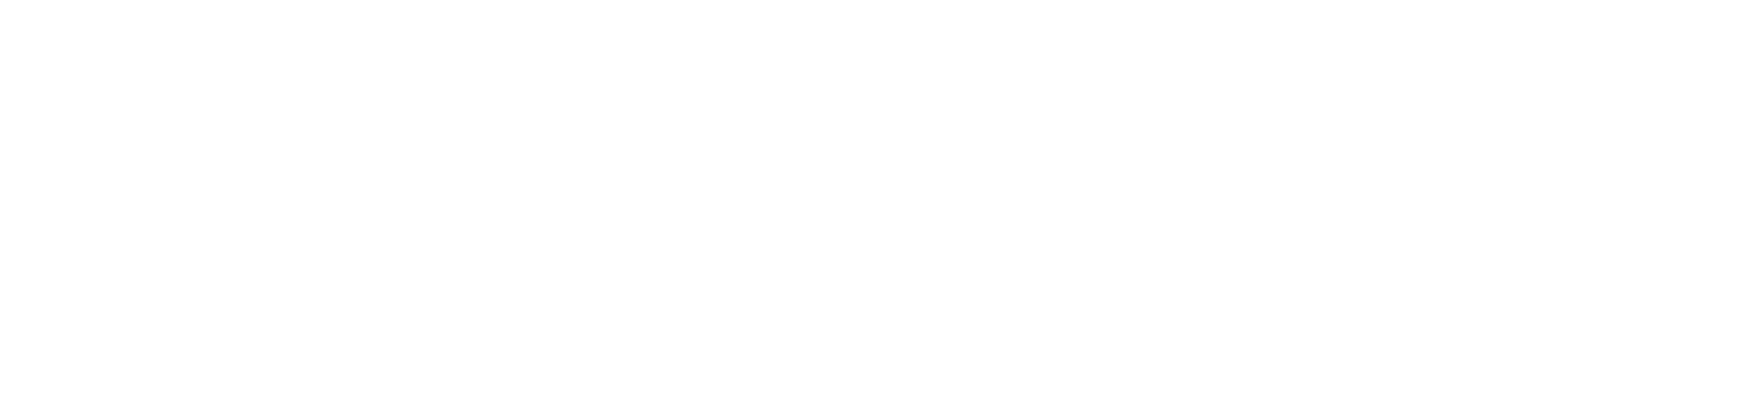 Crepes Factory creperia